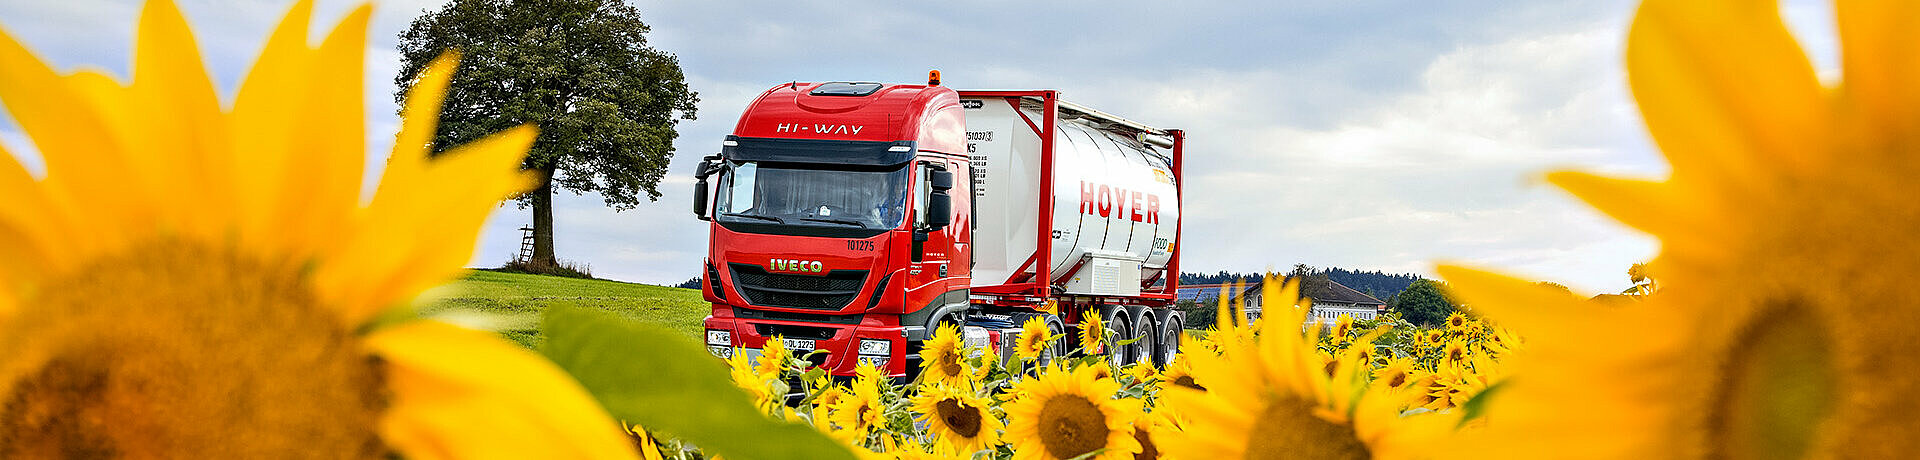 HOYER truck with white foodstuffs tank container behind sunflowers